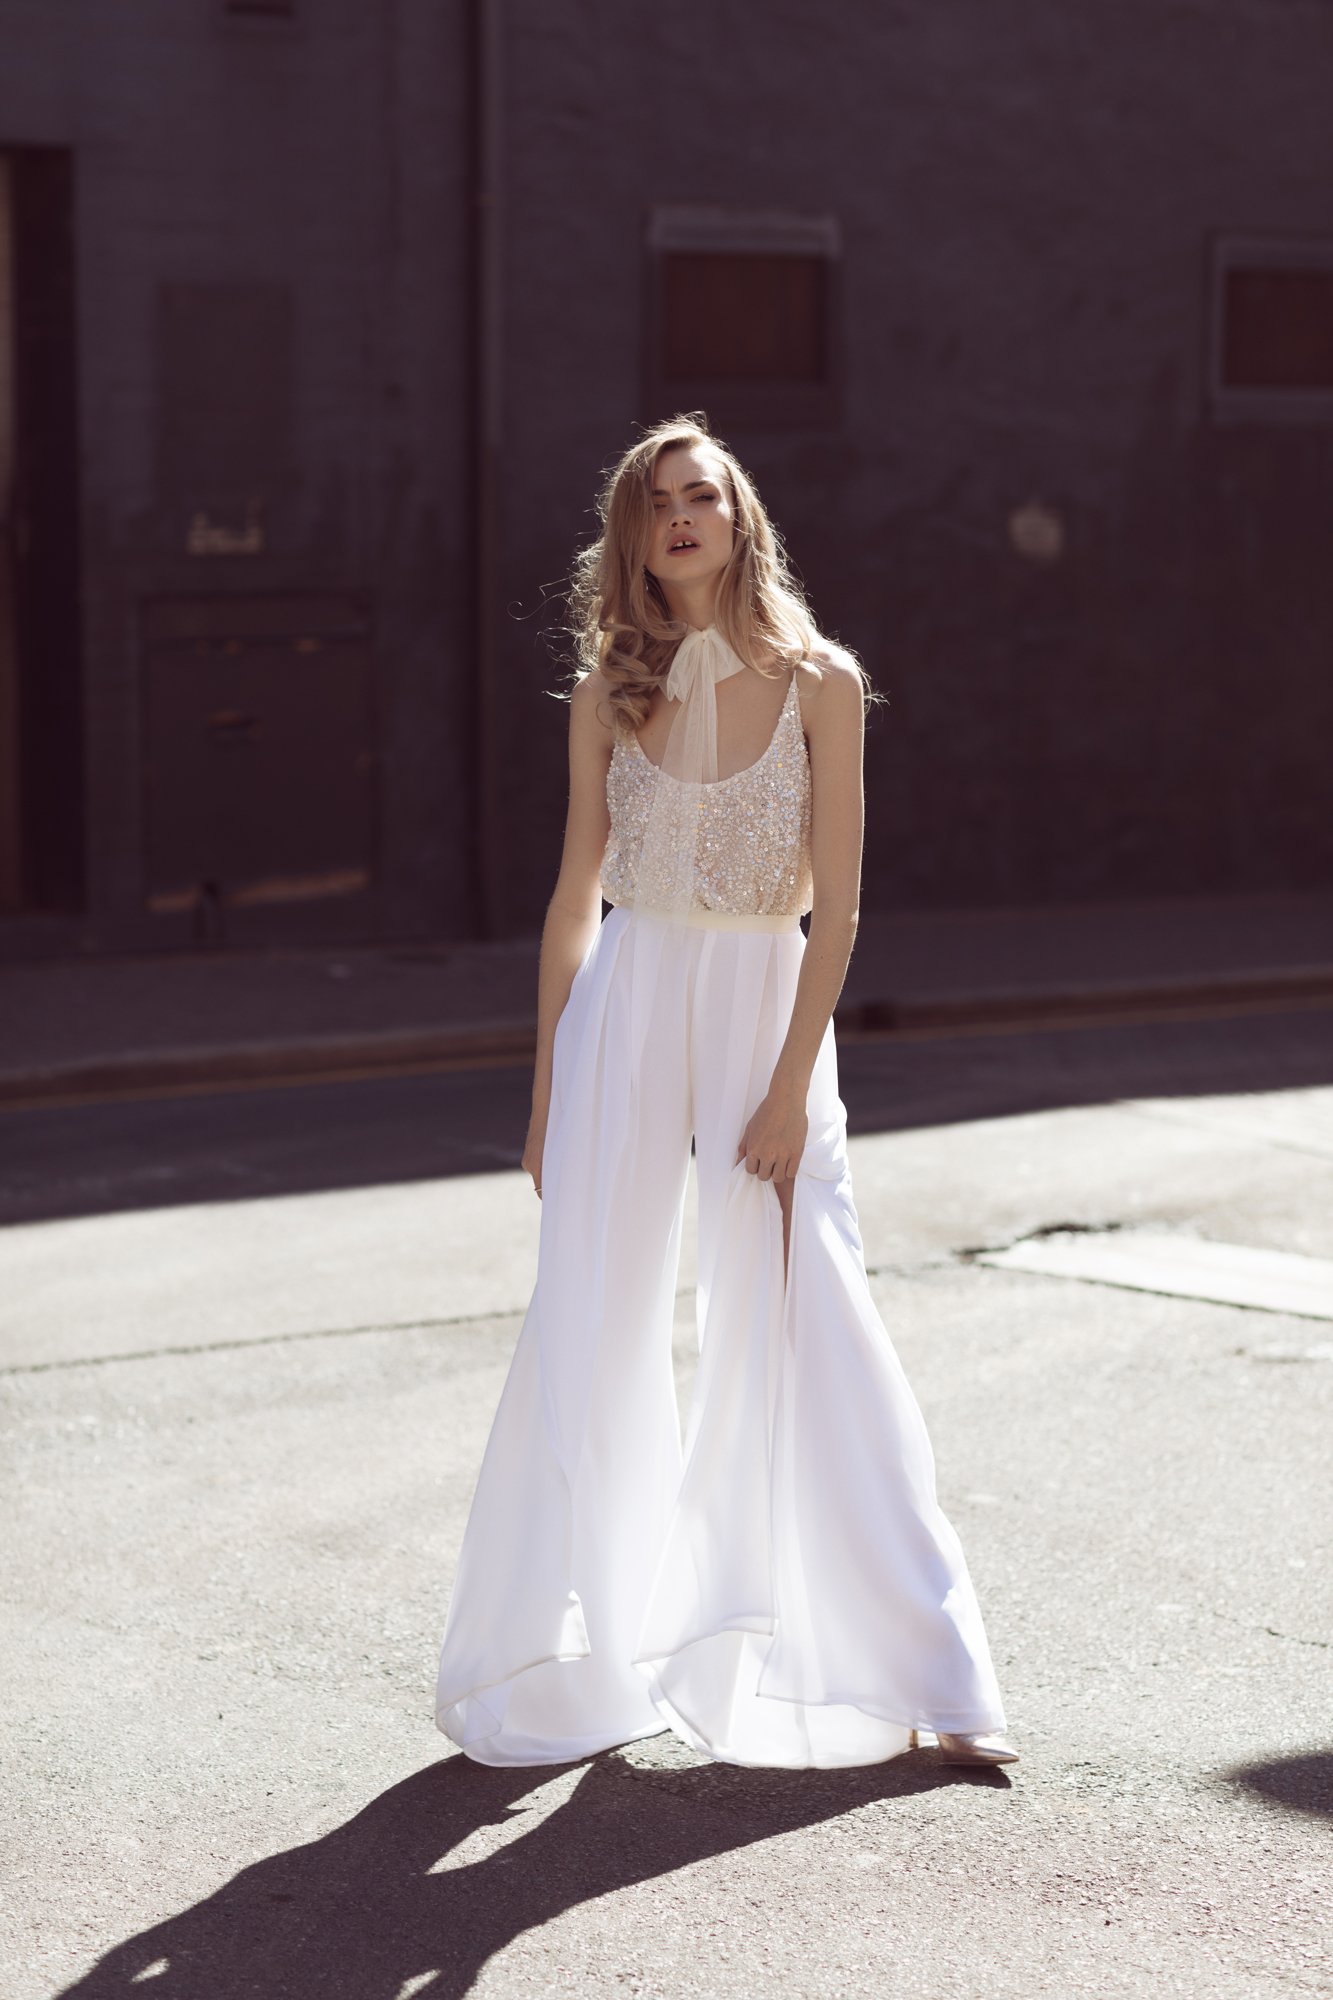 Decadent Daydreams • European Inspired Gowns • Calèche Bridal House